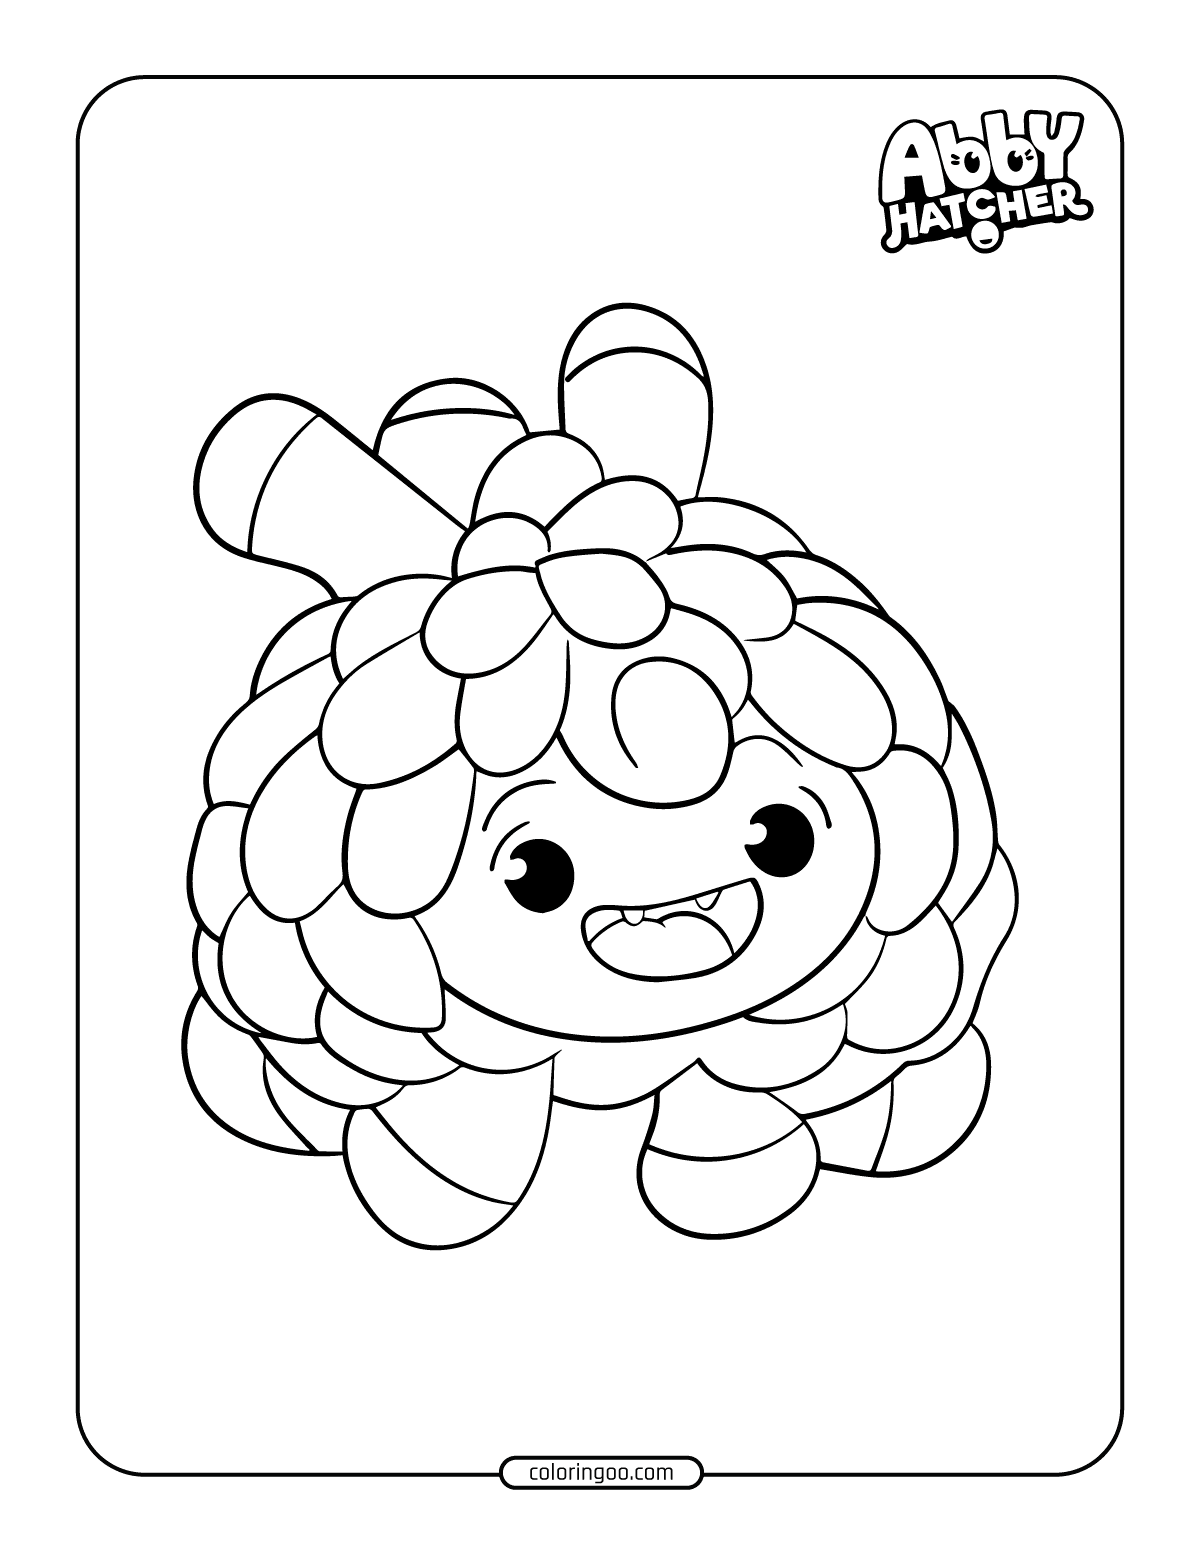 abby hatcher otis coloring page